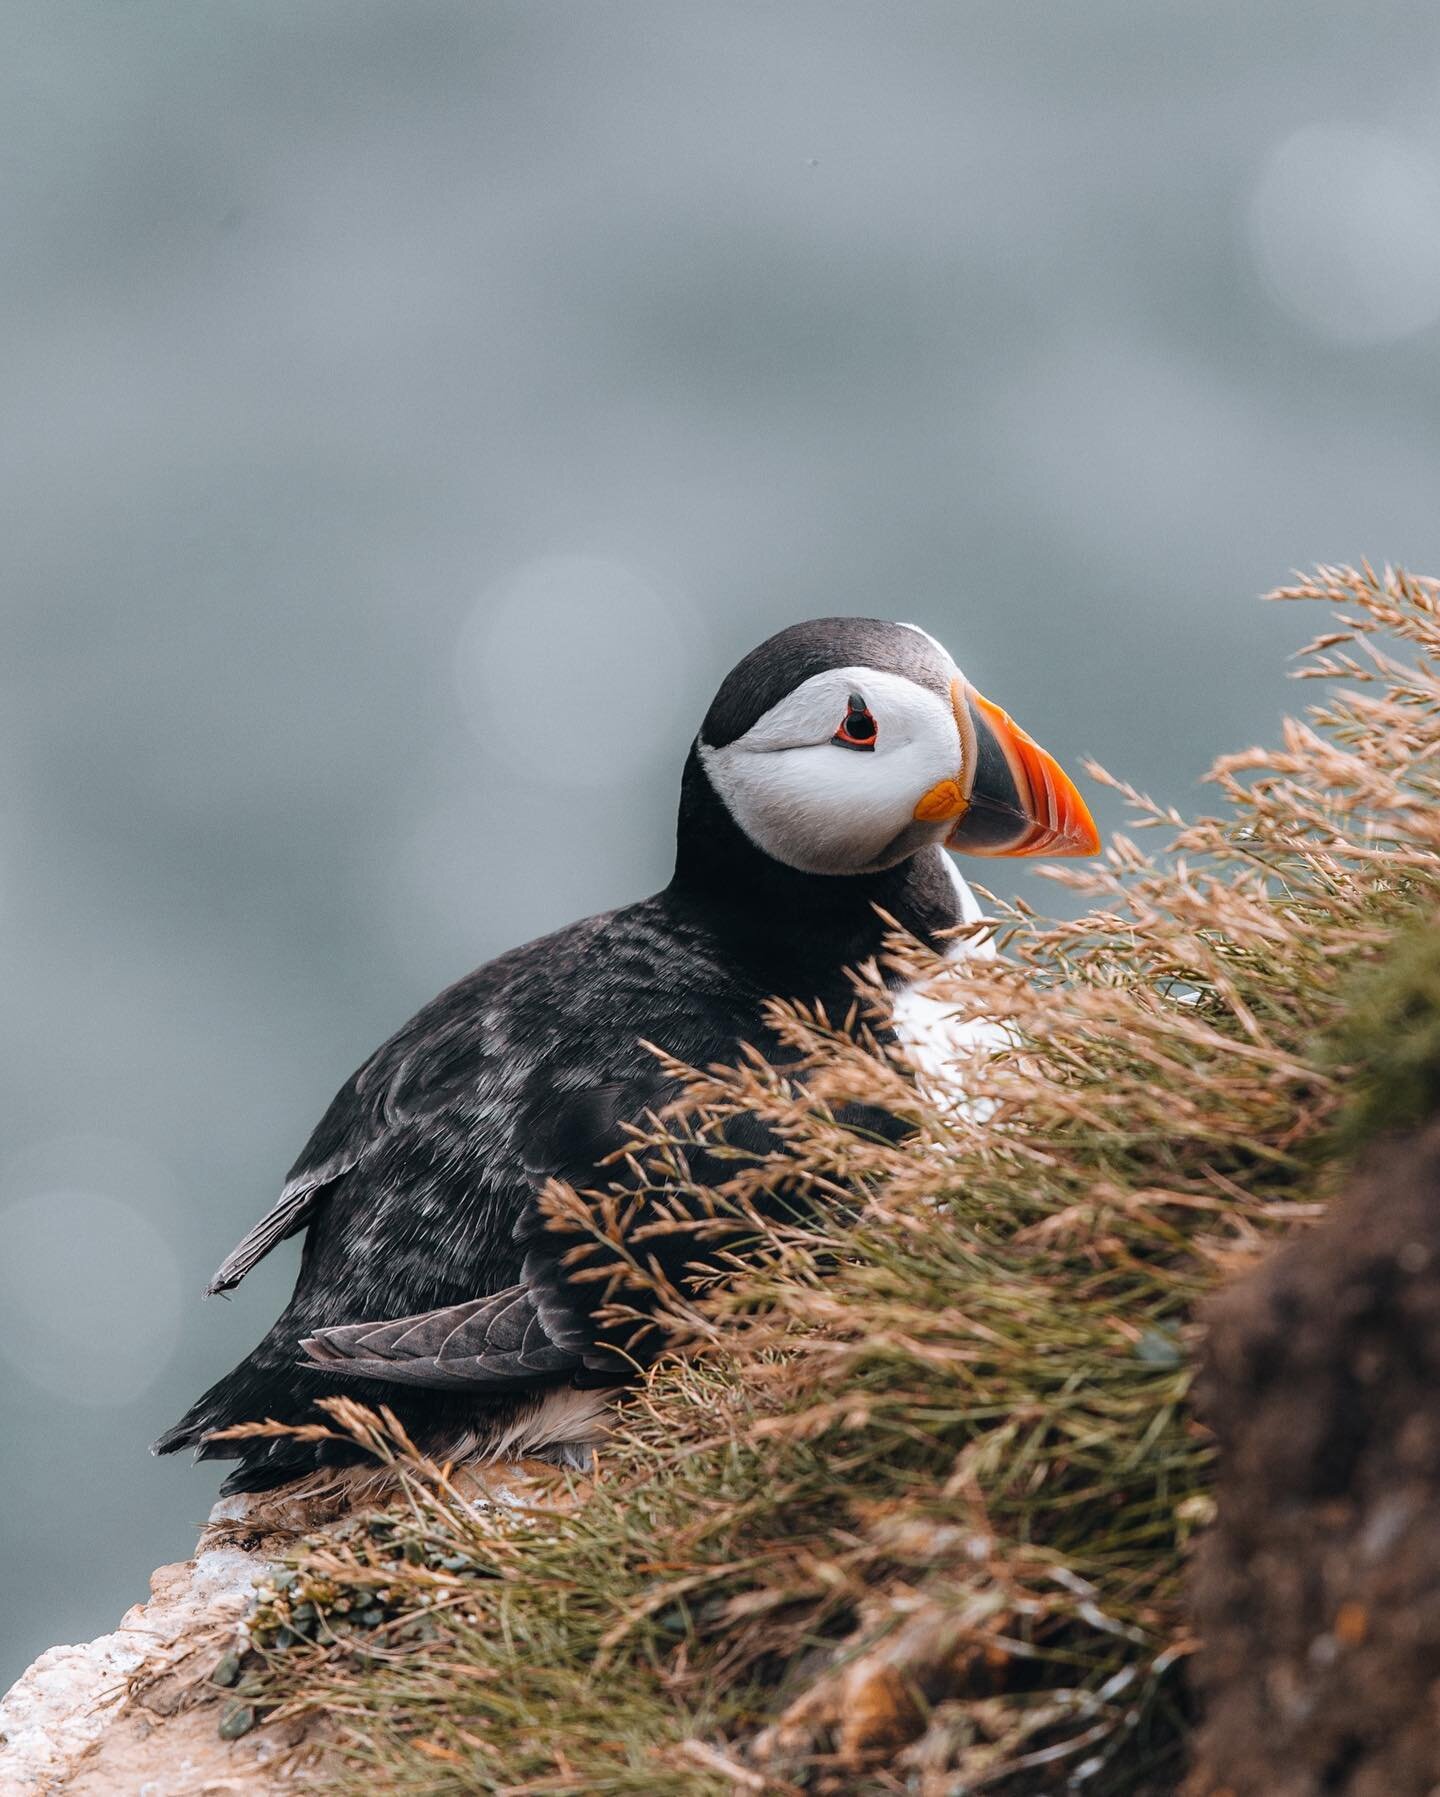 Did you know 💡 A puffin&rsquo;s beak (or bill) changes colour depending on the time of year!

❄️ In winter, the beak has a dull grey colour
🌷 In spring, the beak is bright orange 
&bull;
&bull;
&bull;
&bull;
#bbcwildlife#wildlifephotography#wildlif